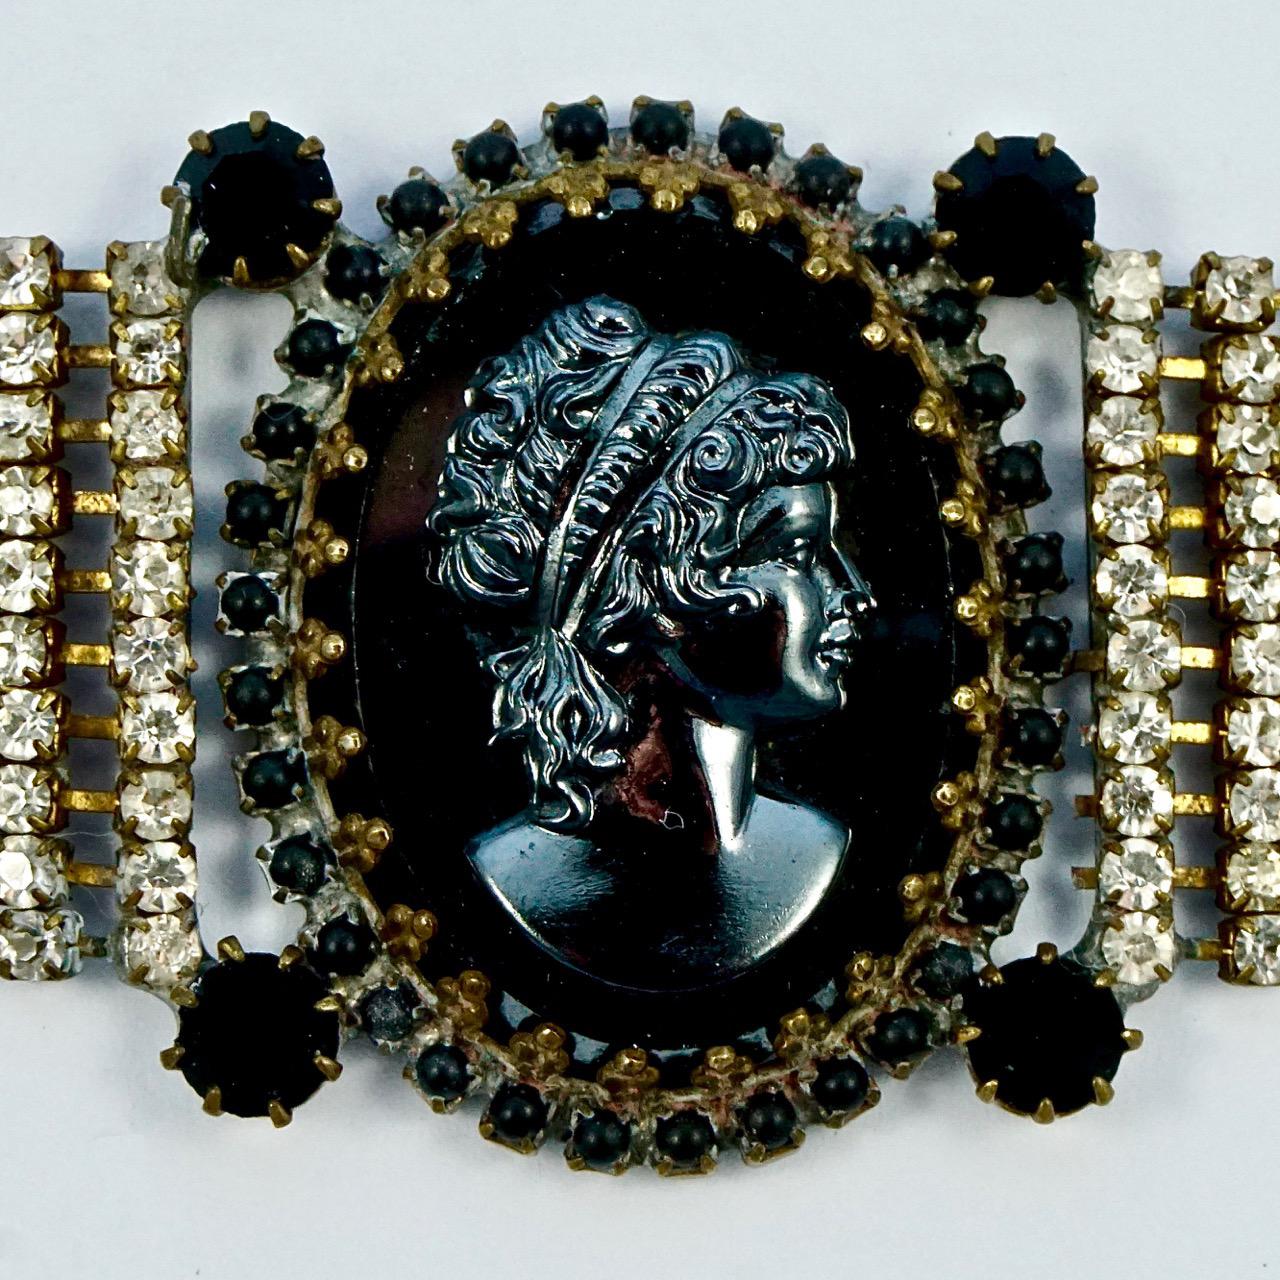 Lovely clear rhinestone bracelet featuring a shiny haematite cameo with matt black glass edging and four black rhinestones. The bracelet is most likely Czech. Measuring length 17.5cm / 6.9 inches, and the band is width is 2.4cm / .94 inch. Part of